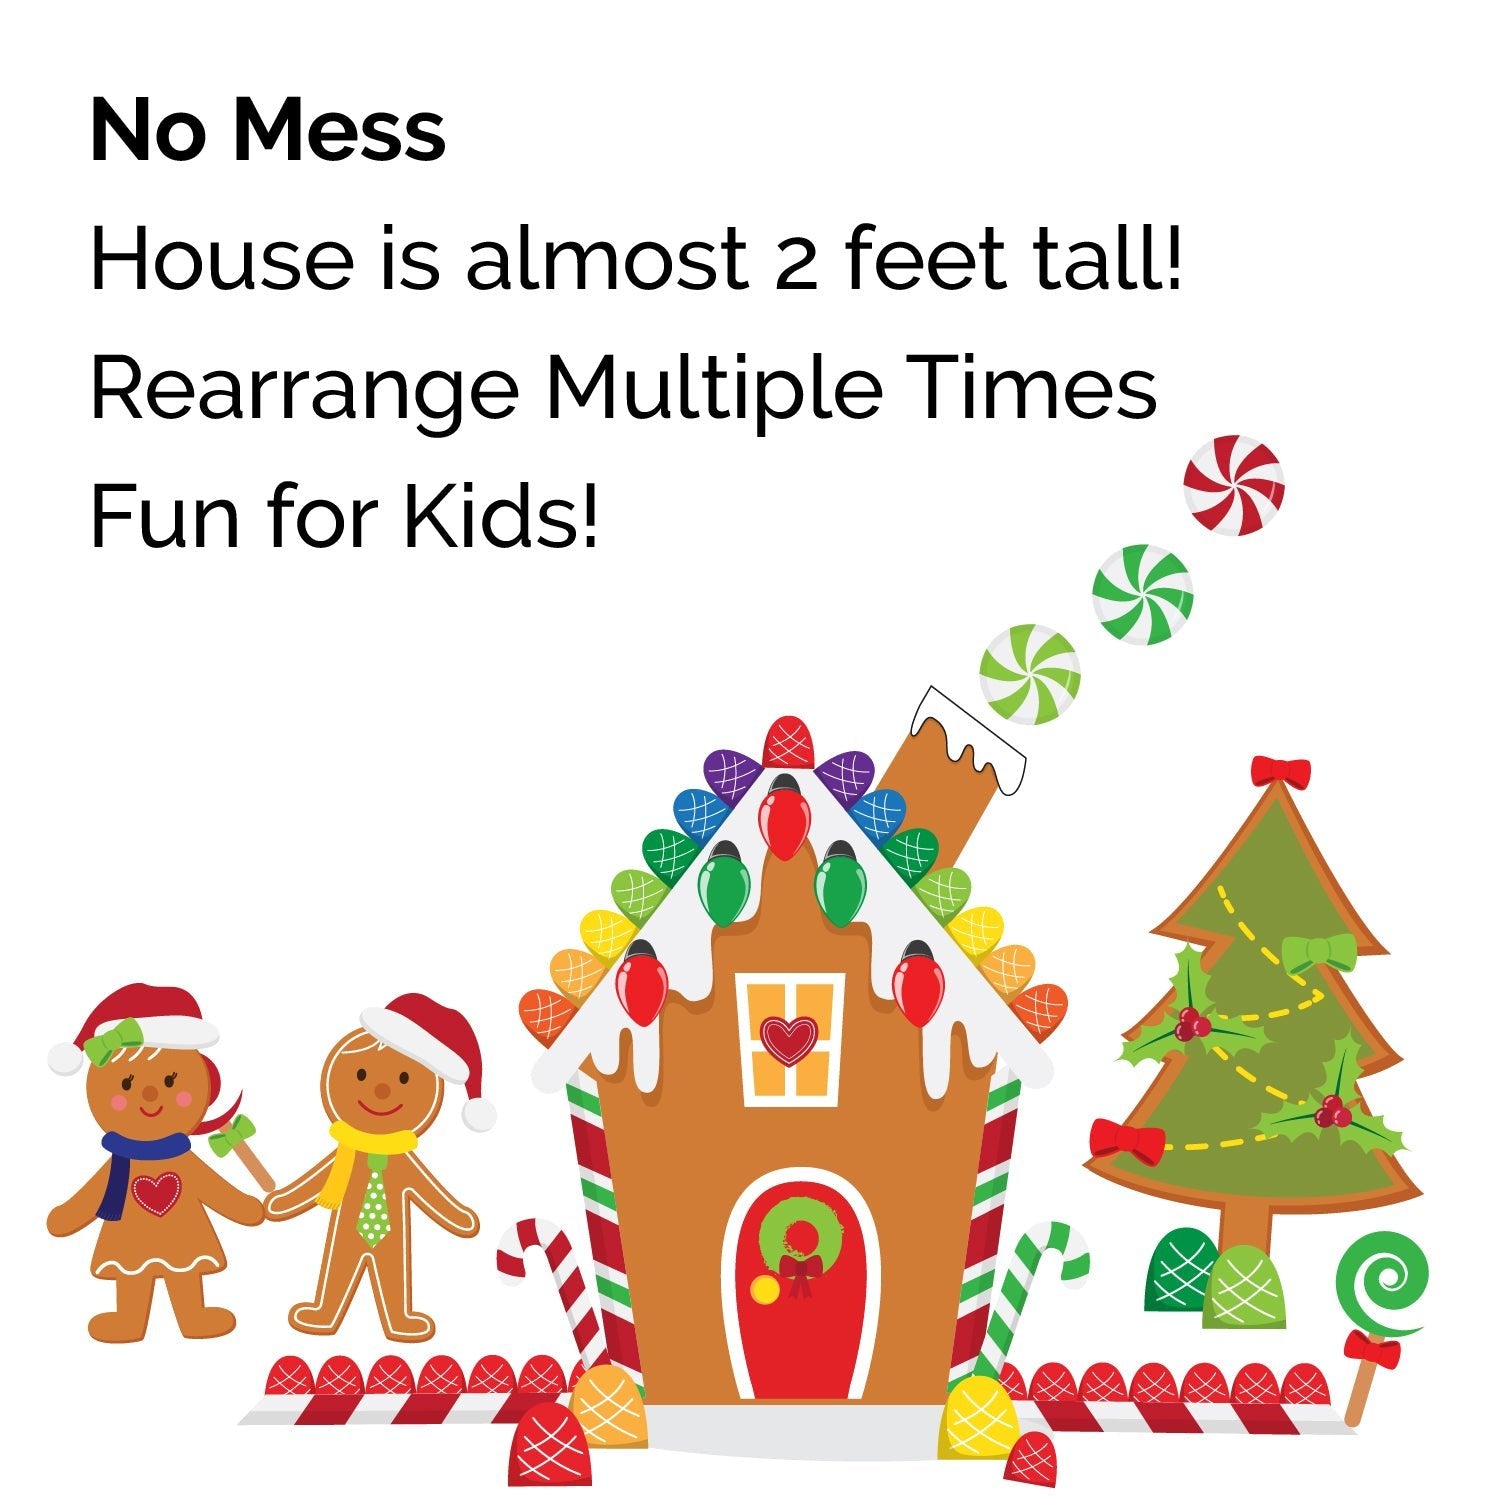 Christmas Gingerbread House Kit Wall Decals - NO MESS! - Picture Perfect Decals